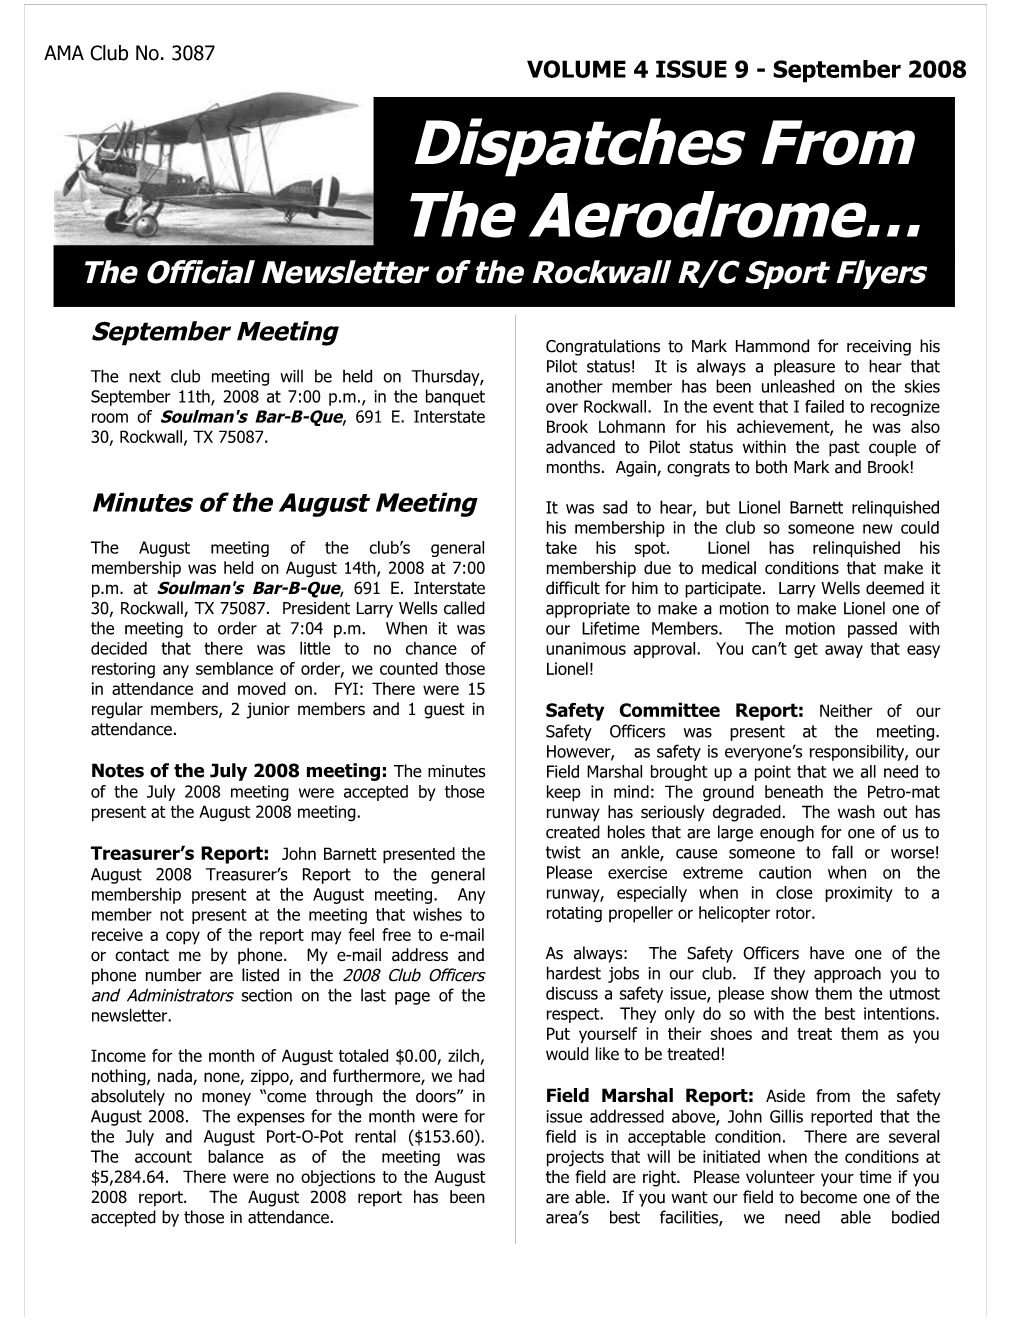 Dispatches from the Aerodrome September 2008 Page 2